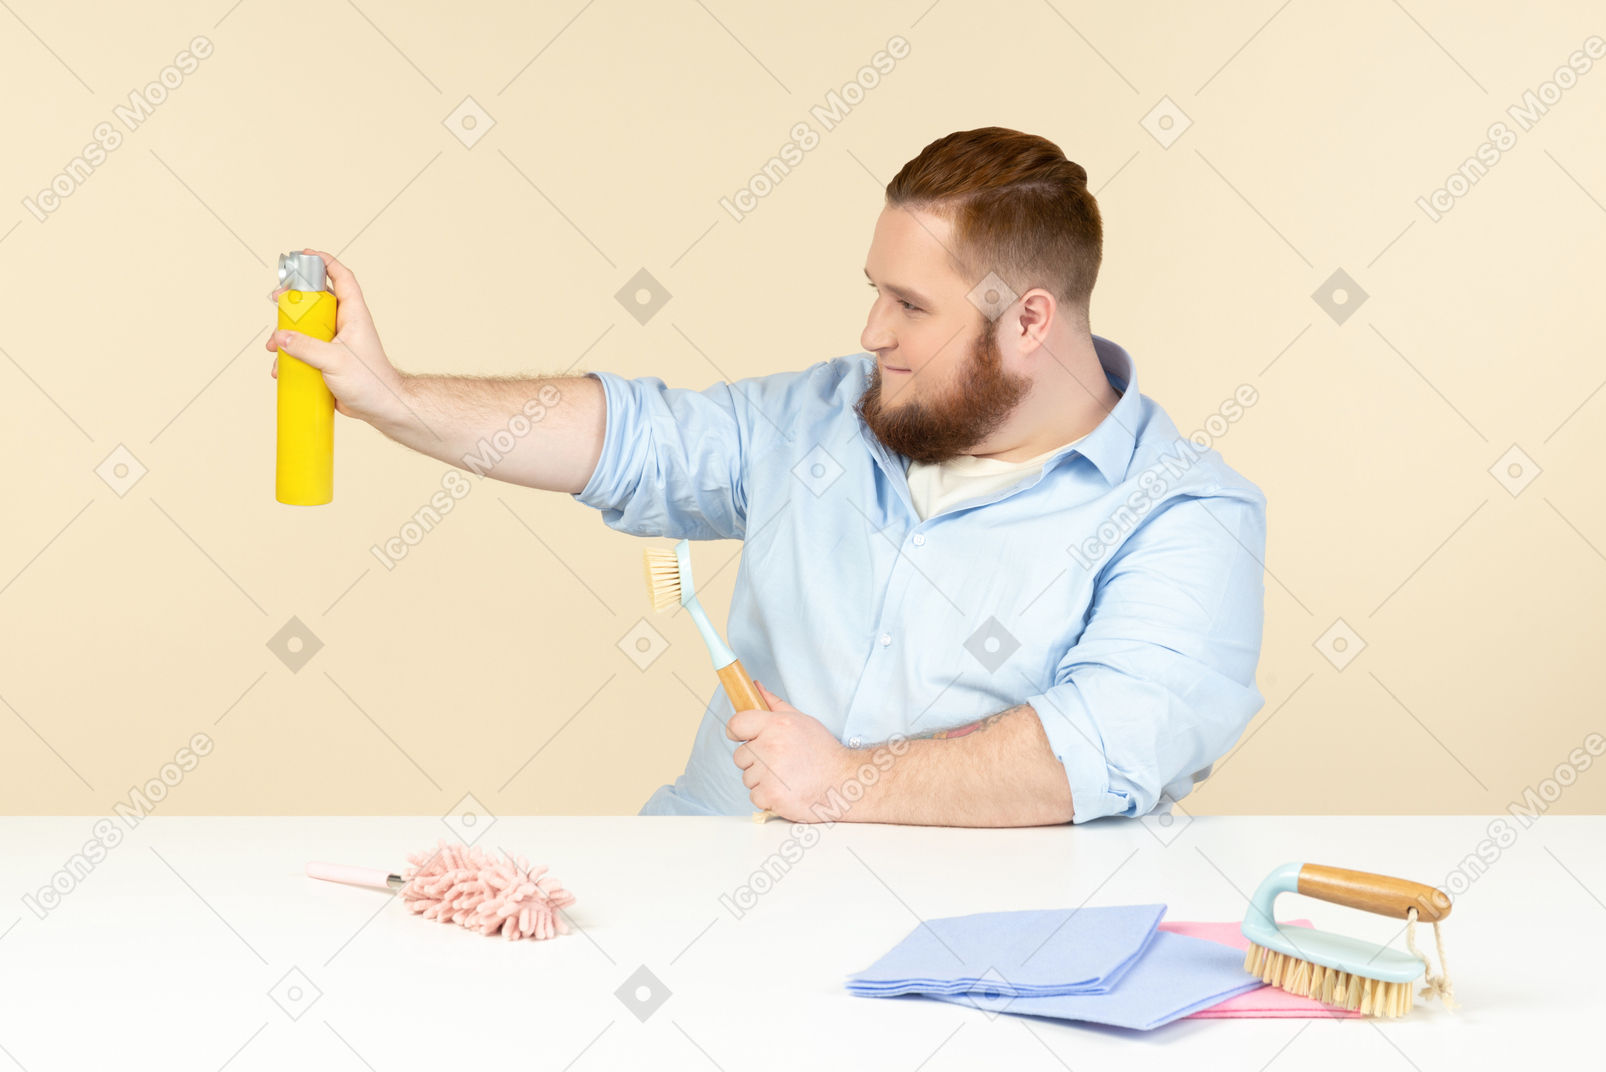 Young overweight househusband sitting at the table and holding cleaning spray